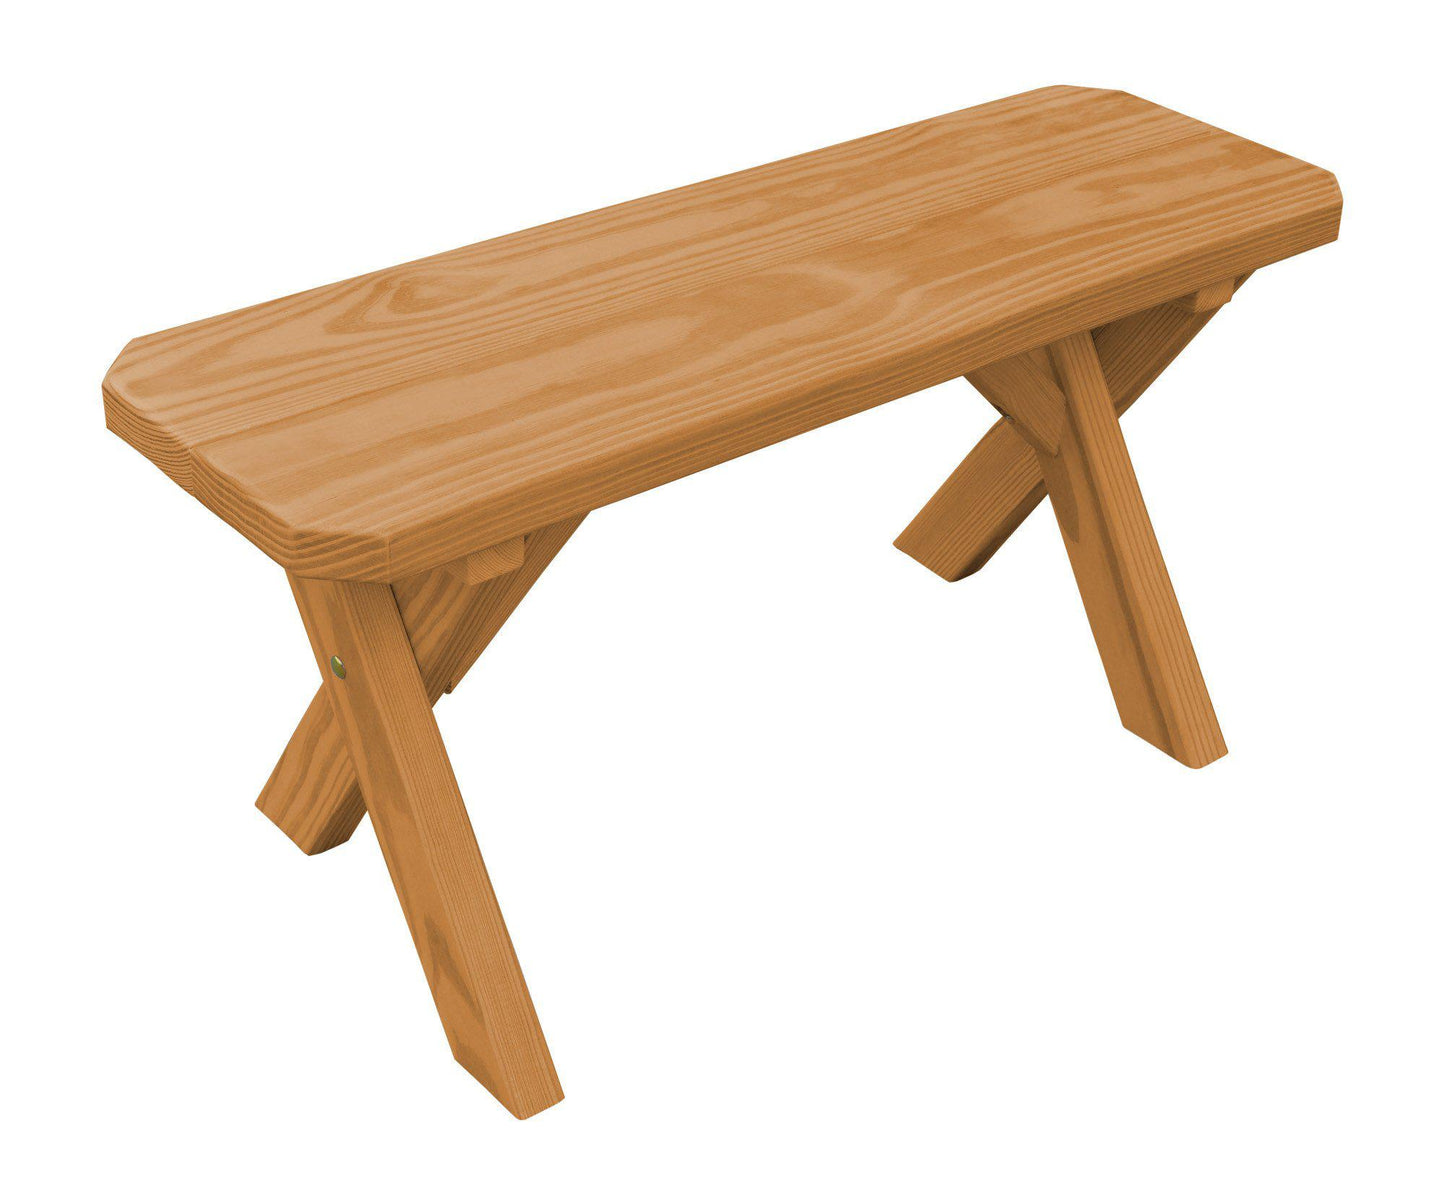 A&L Furniture Co. Yellow Pine 33" Crossleg Bench Only - LEAD TIME TO SHIP 10 BUSINESS DAYS